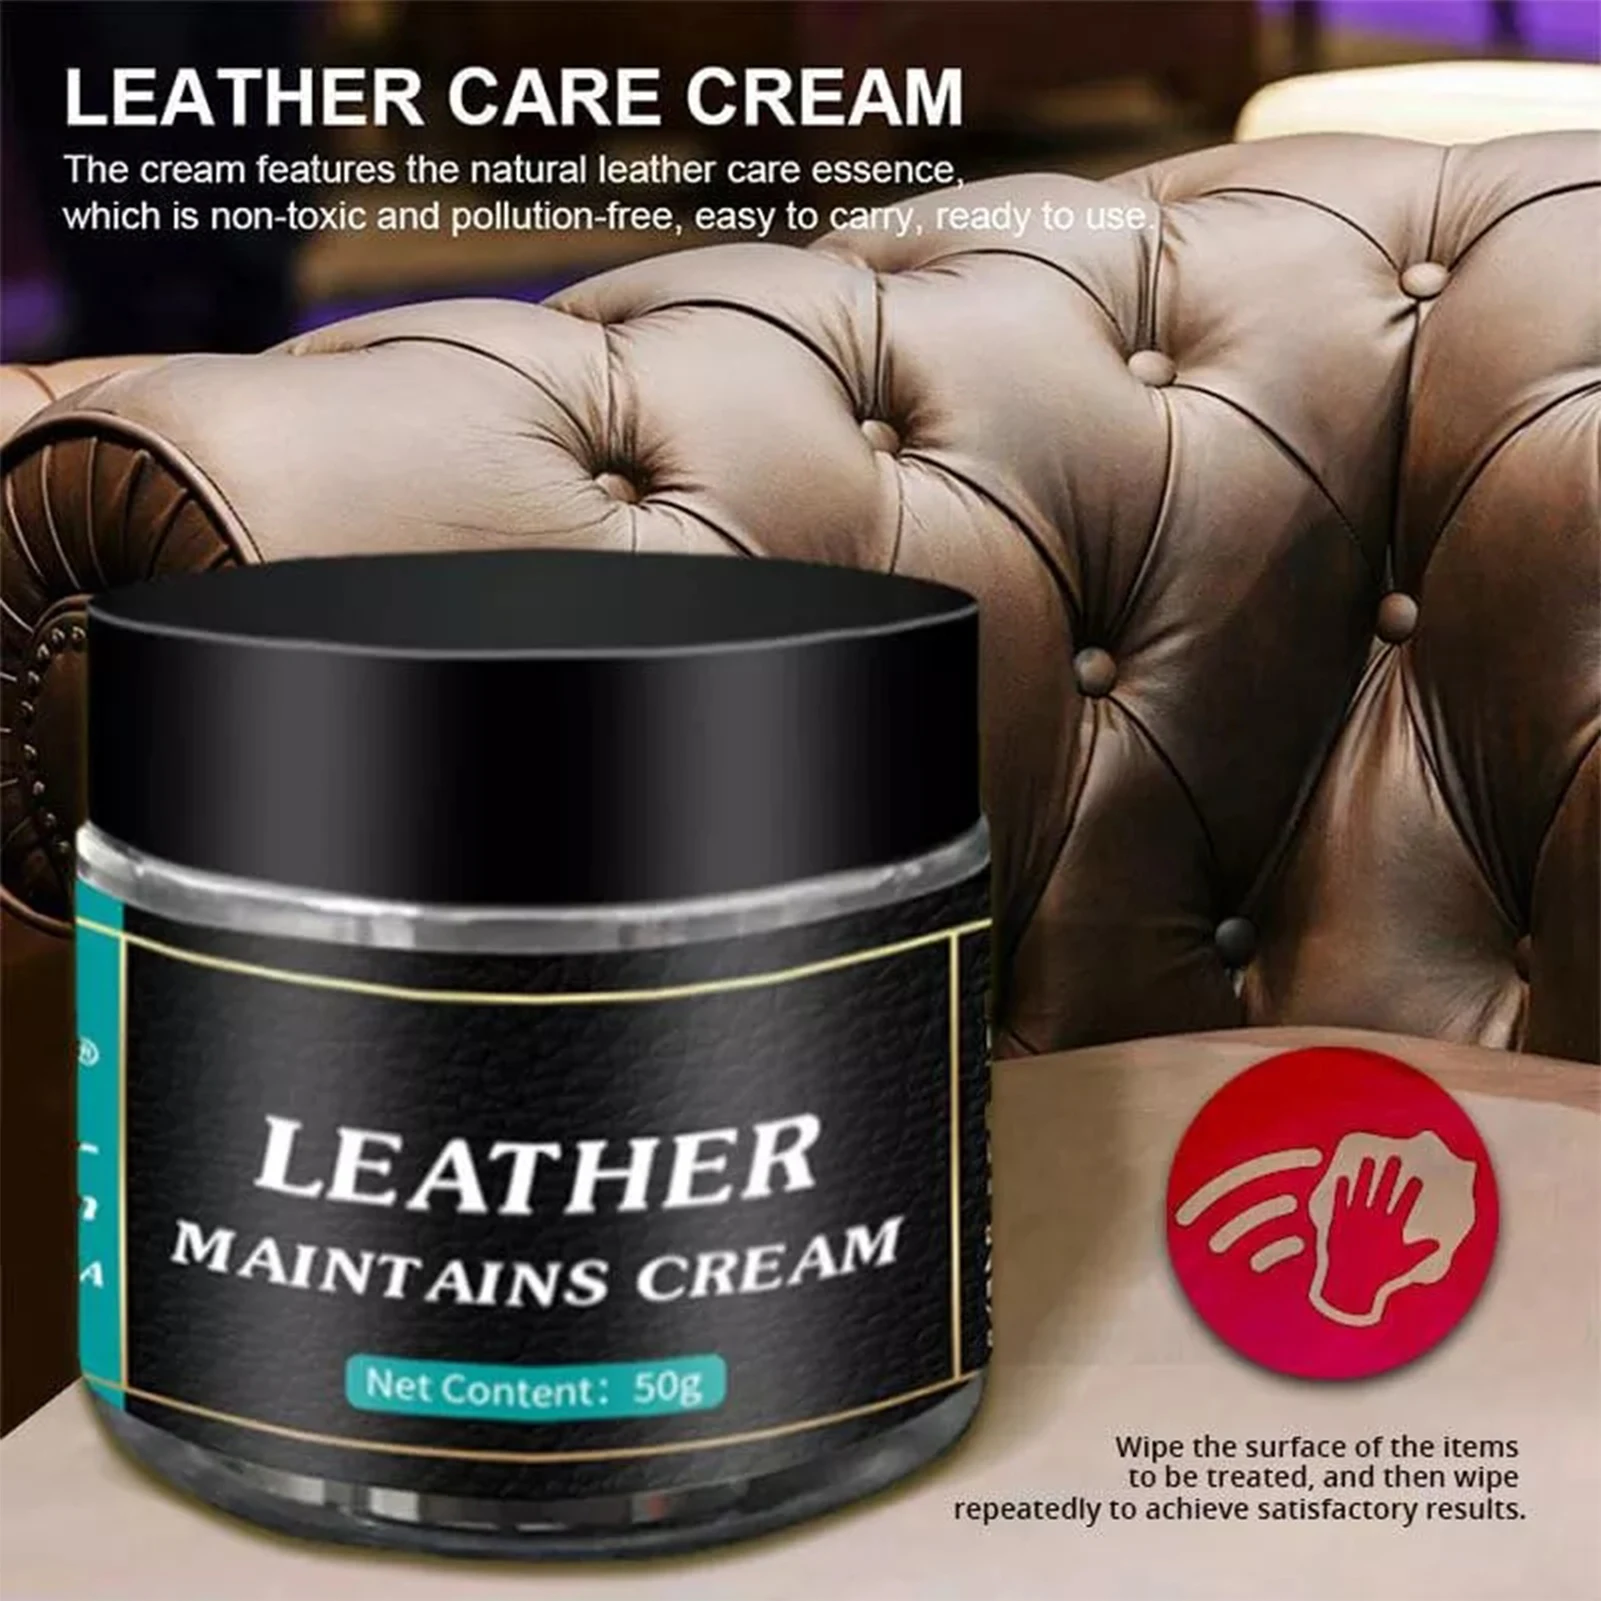 

Leather Maintenance Cream Scratch Repair Restore Faded Renew Leather Restorer Leather Repair Cream Leather Care Products